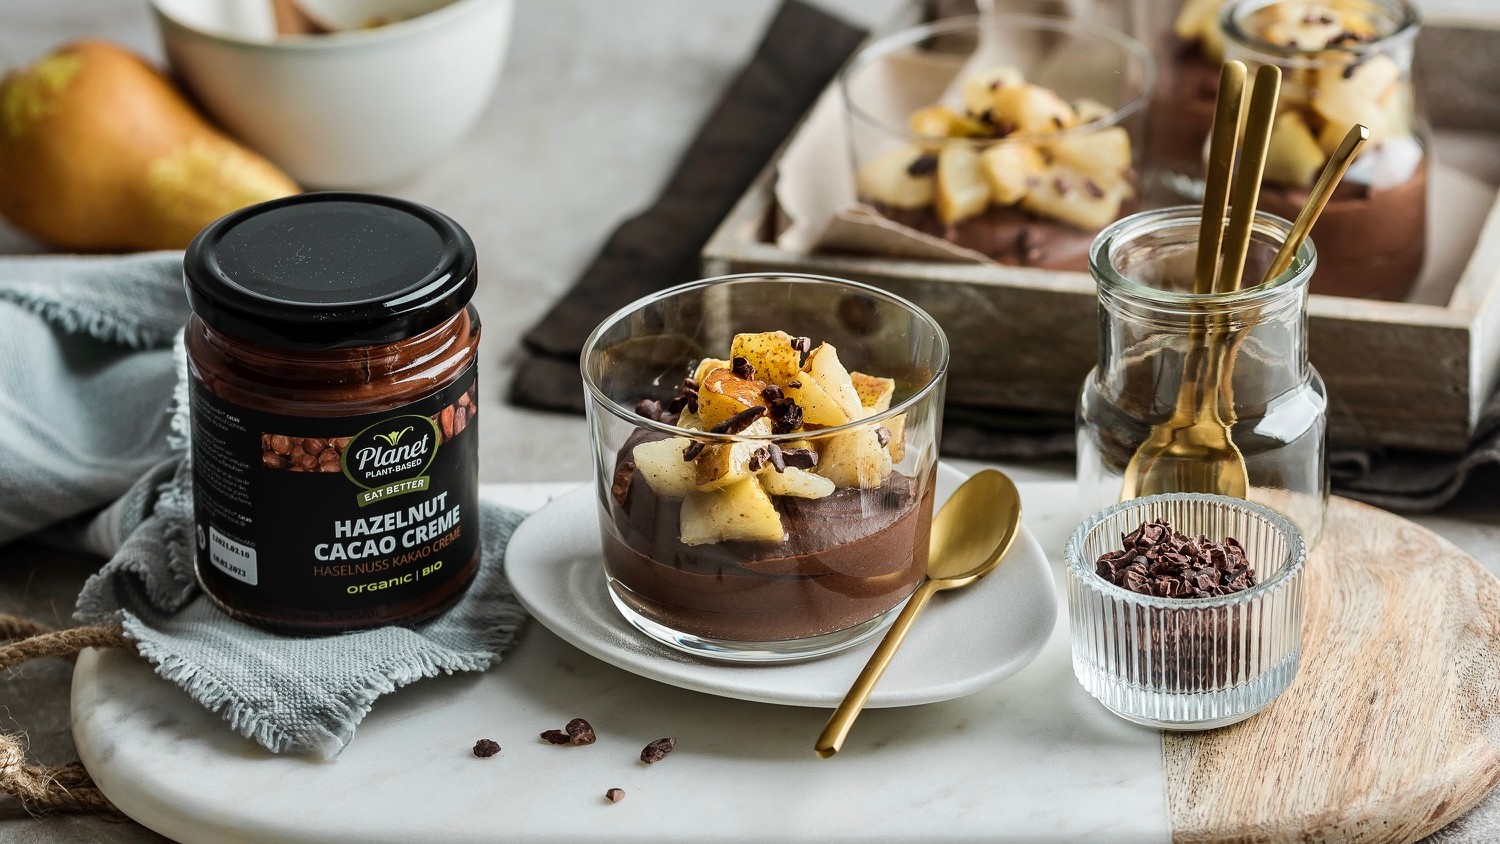 Image of Chocolate mousse with pear compote